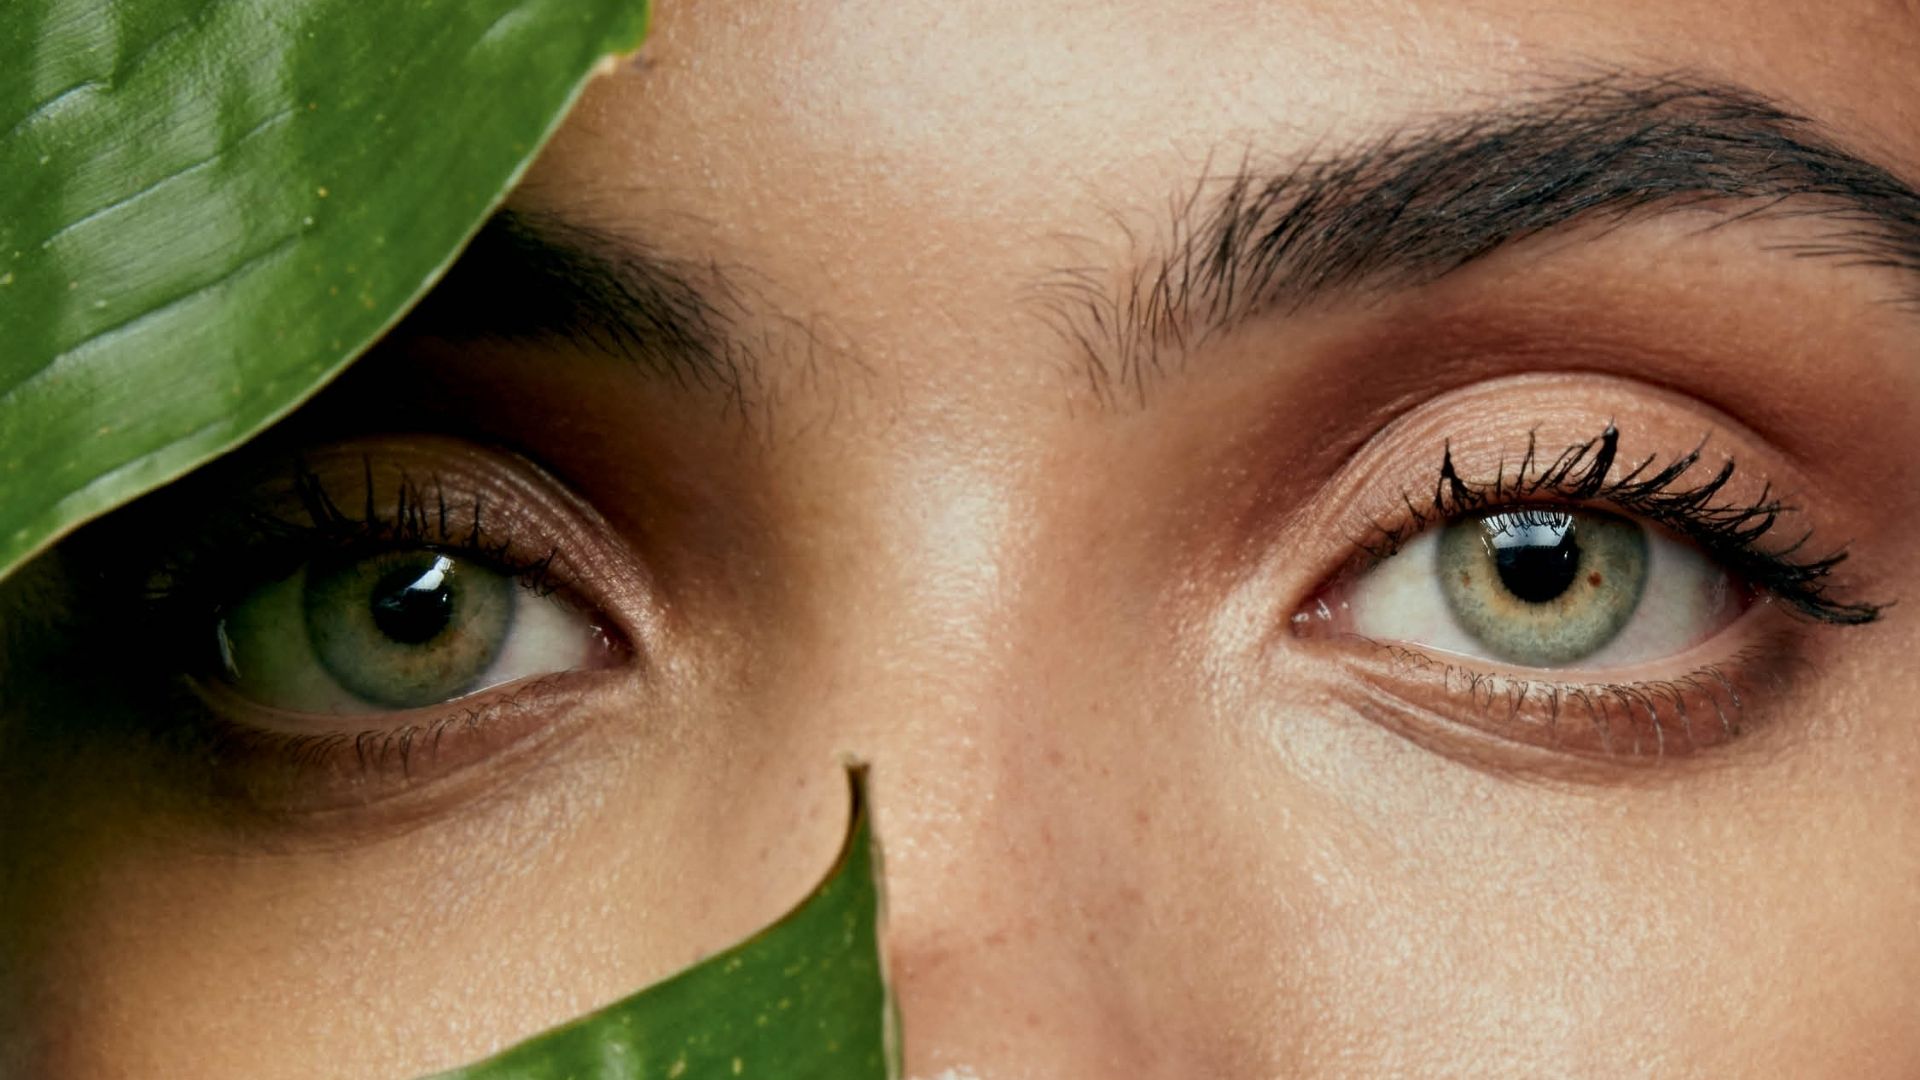 Ayurveda Beauty Treatments Are Taking The Industry By Storm